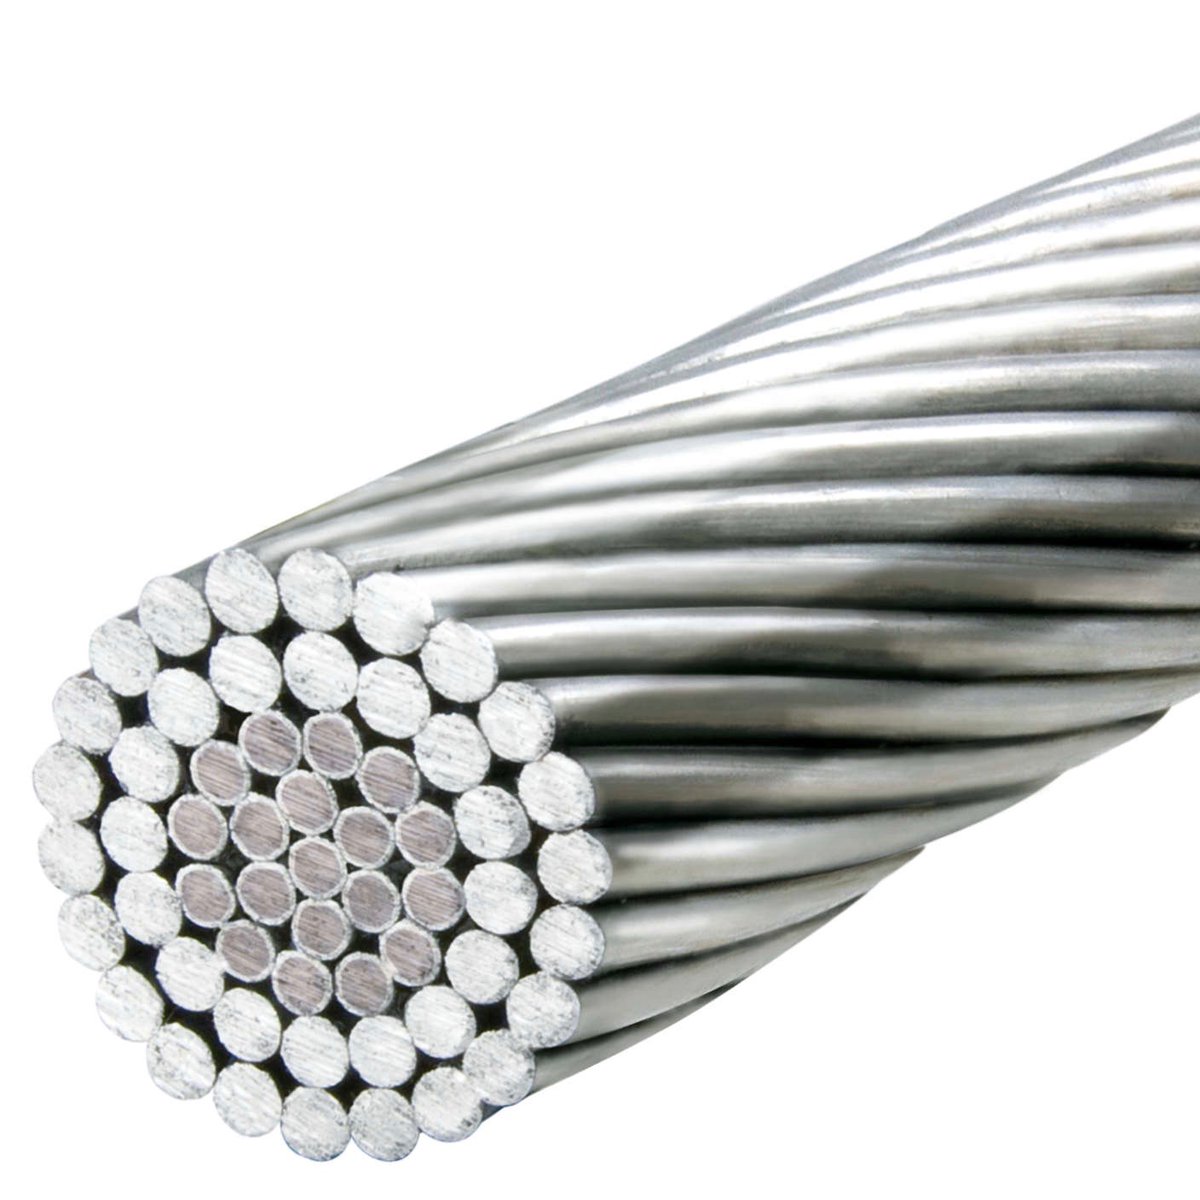 ACSR(https://t.co/HyJAb5Z8tS) is a reinforced wire in which single-layer or multi-layer aluminum strands are twisted outside the galvanized steel core wire. Mainly used in the power and transmission line industries. https://t.co/v2ATKXqVQ3